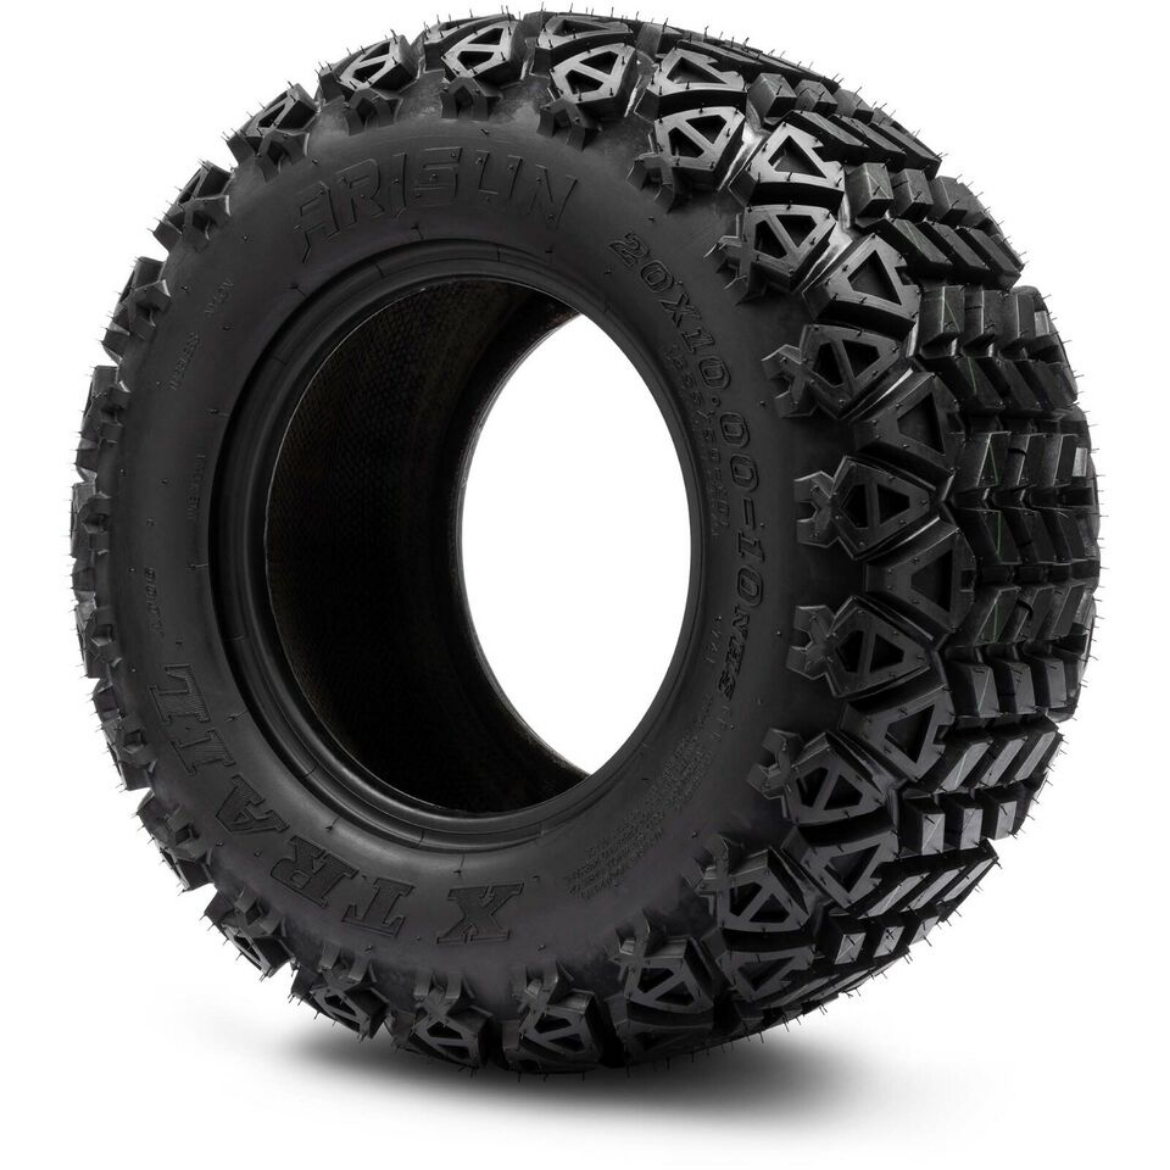 Picture of Arisun X-Trail All-Terrain Tyre 20x10-10 6 Ply (OFFROAD)